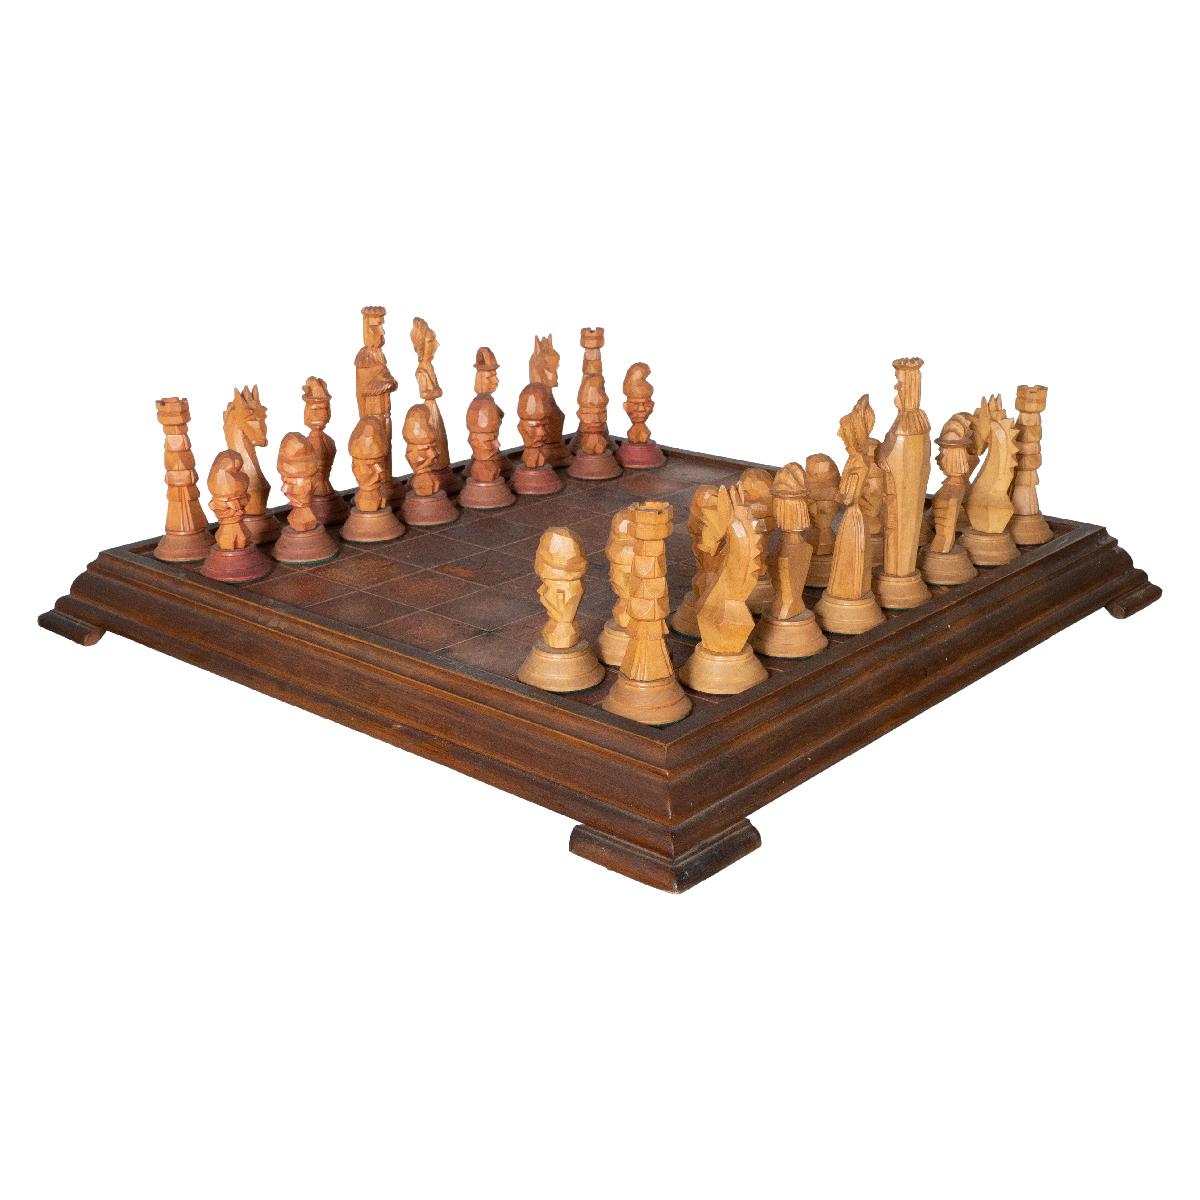 Intricately hand-carved wooden chess with leather game board. King piece measures 4.25